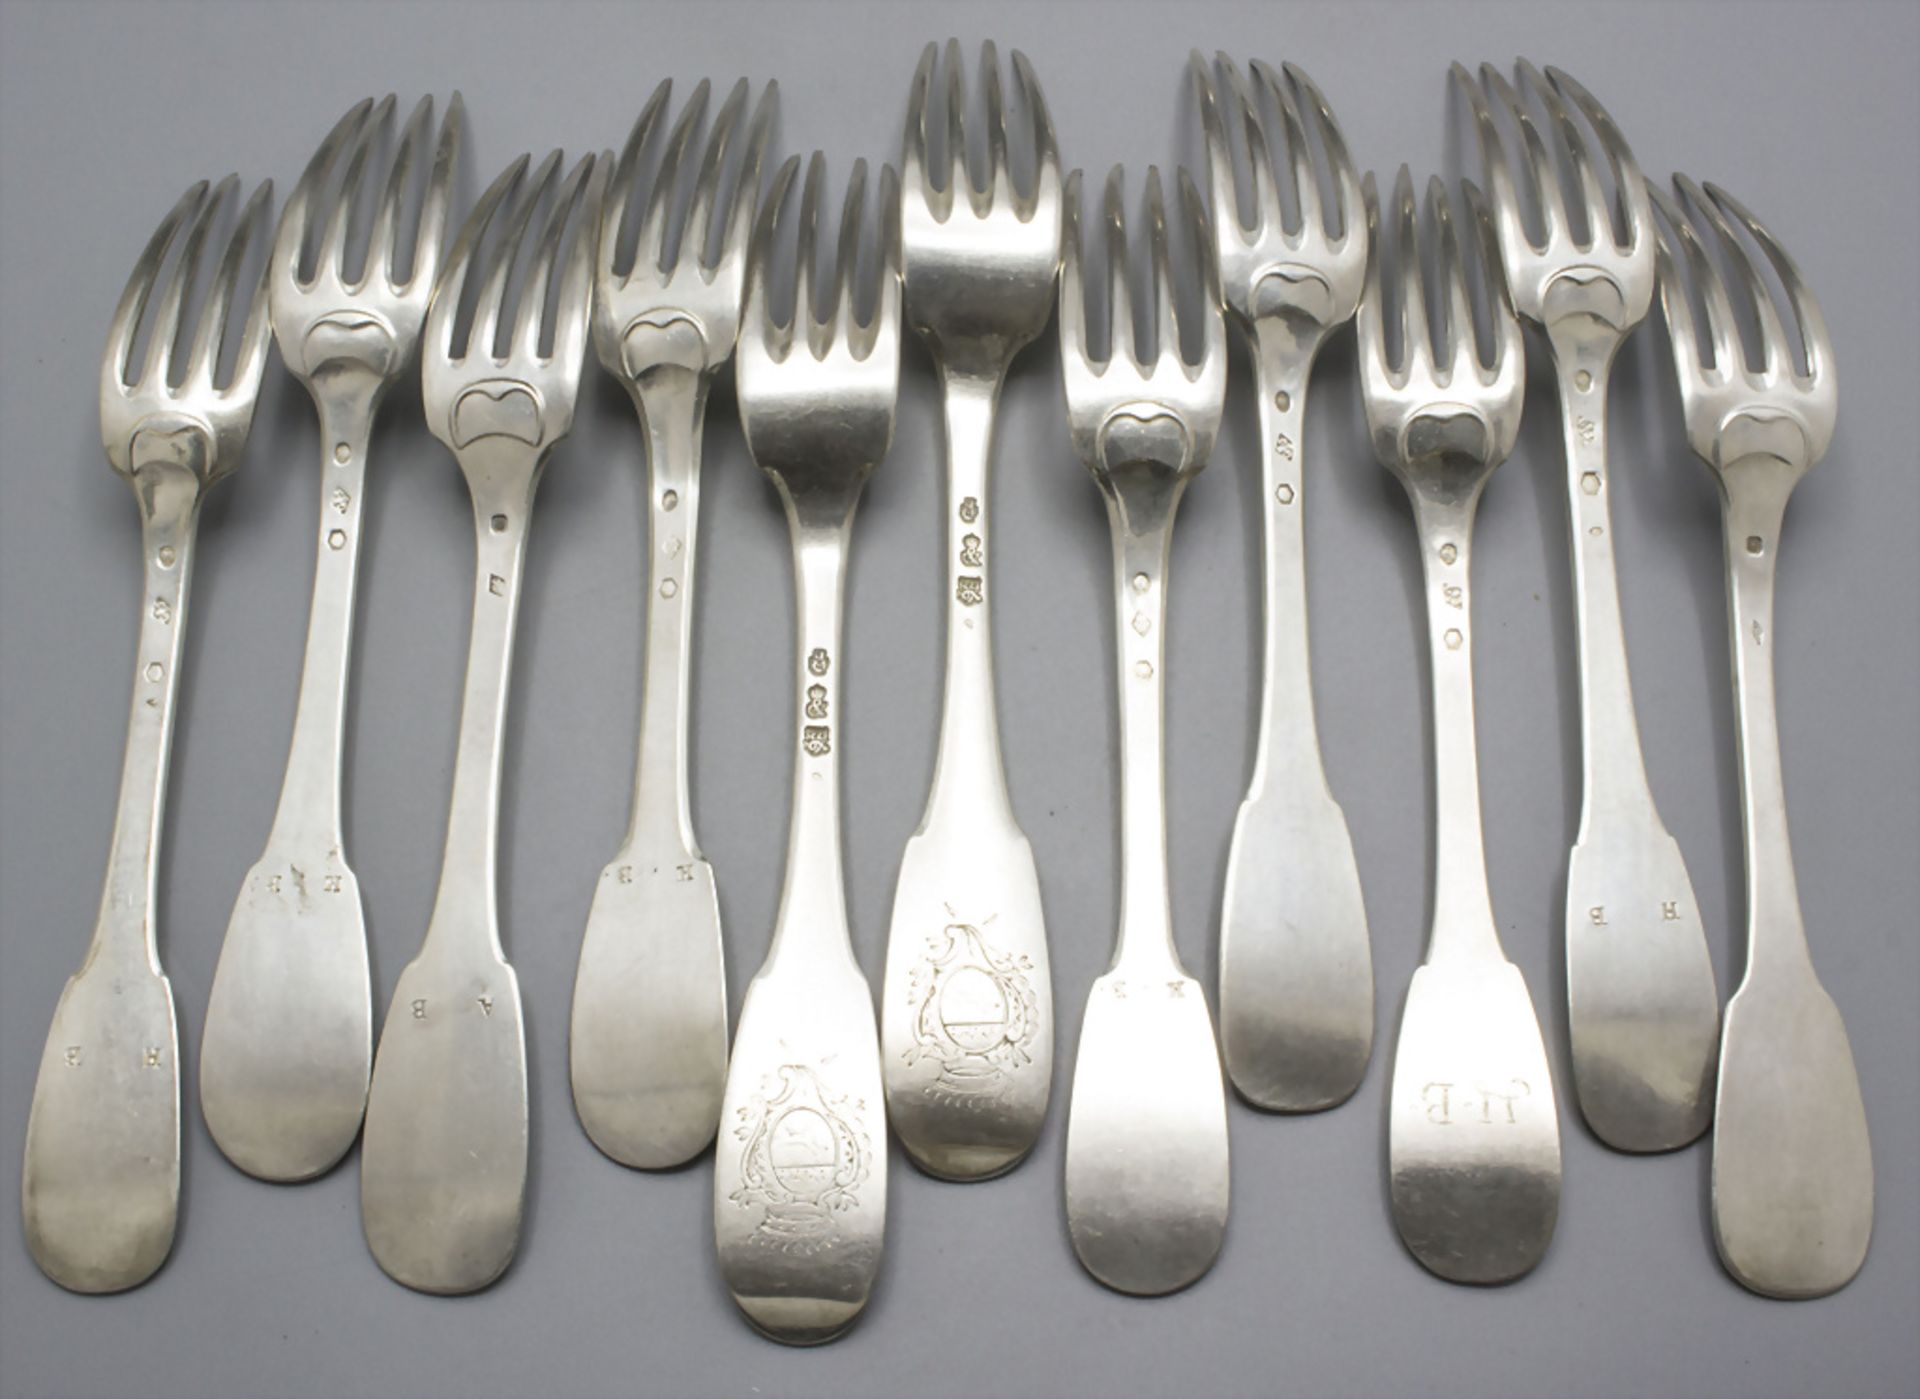 23 Teile Restbesteck / 23 pieces of silver cutlery, Marseille, 1770-1820 - Image 3 of 17